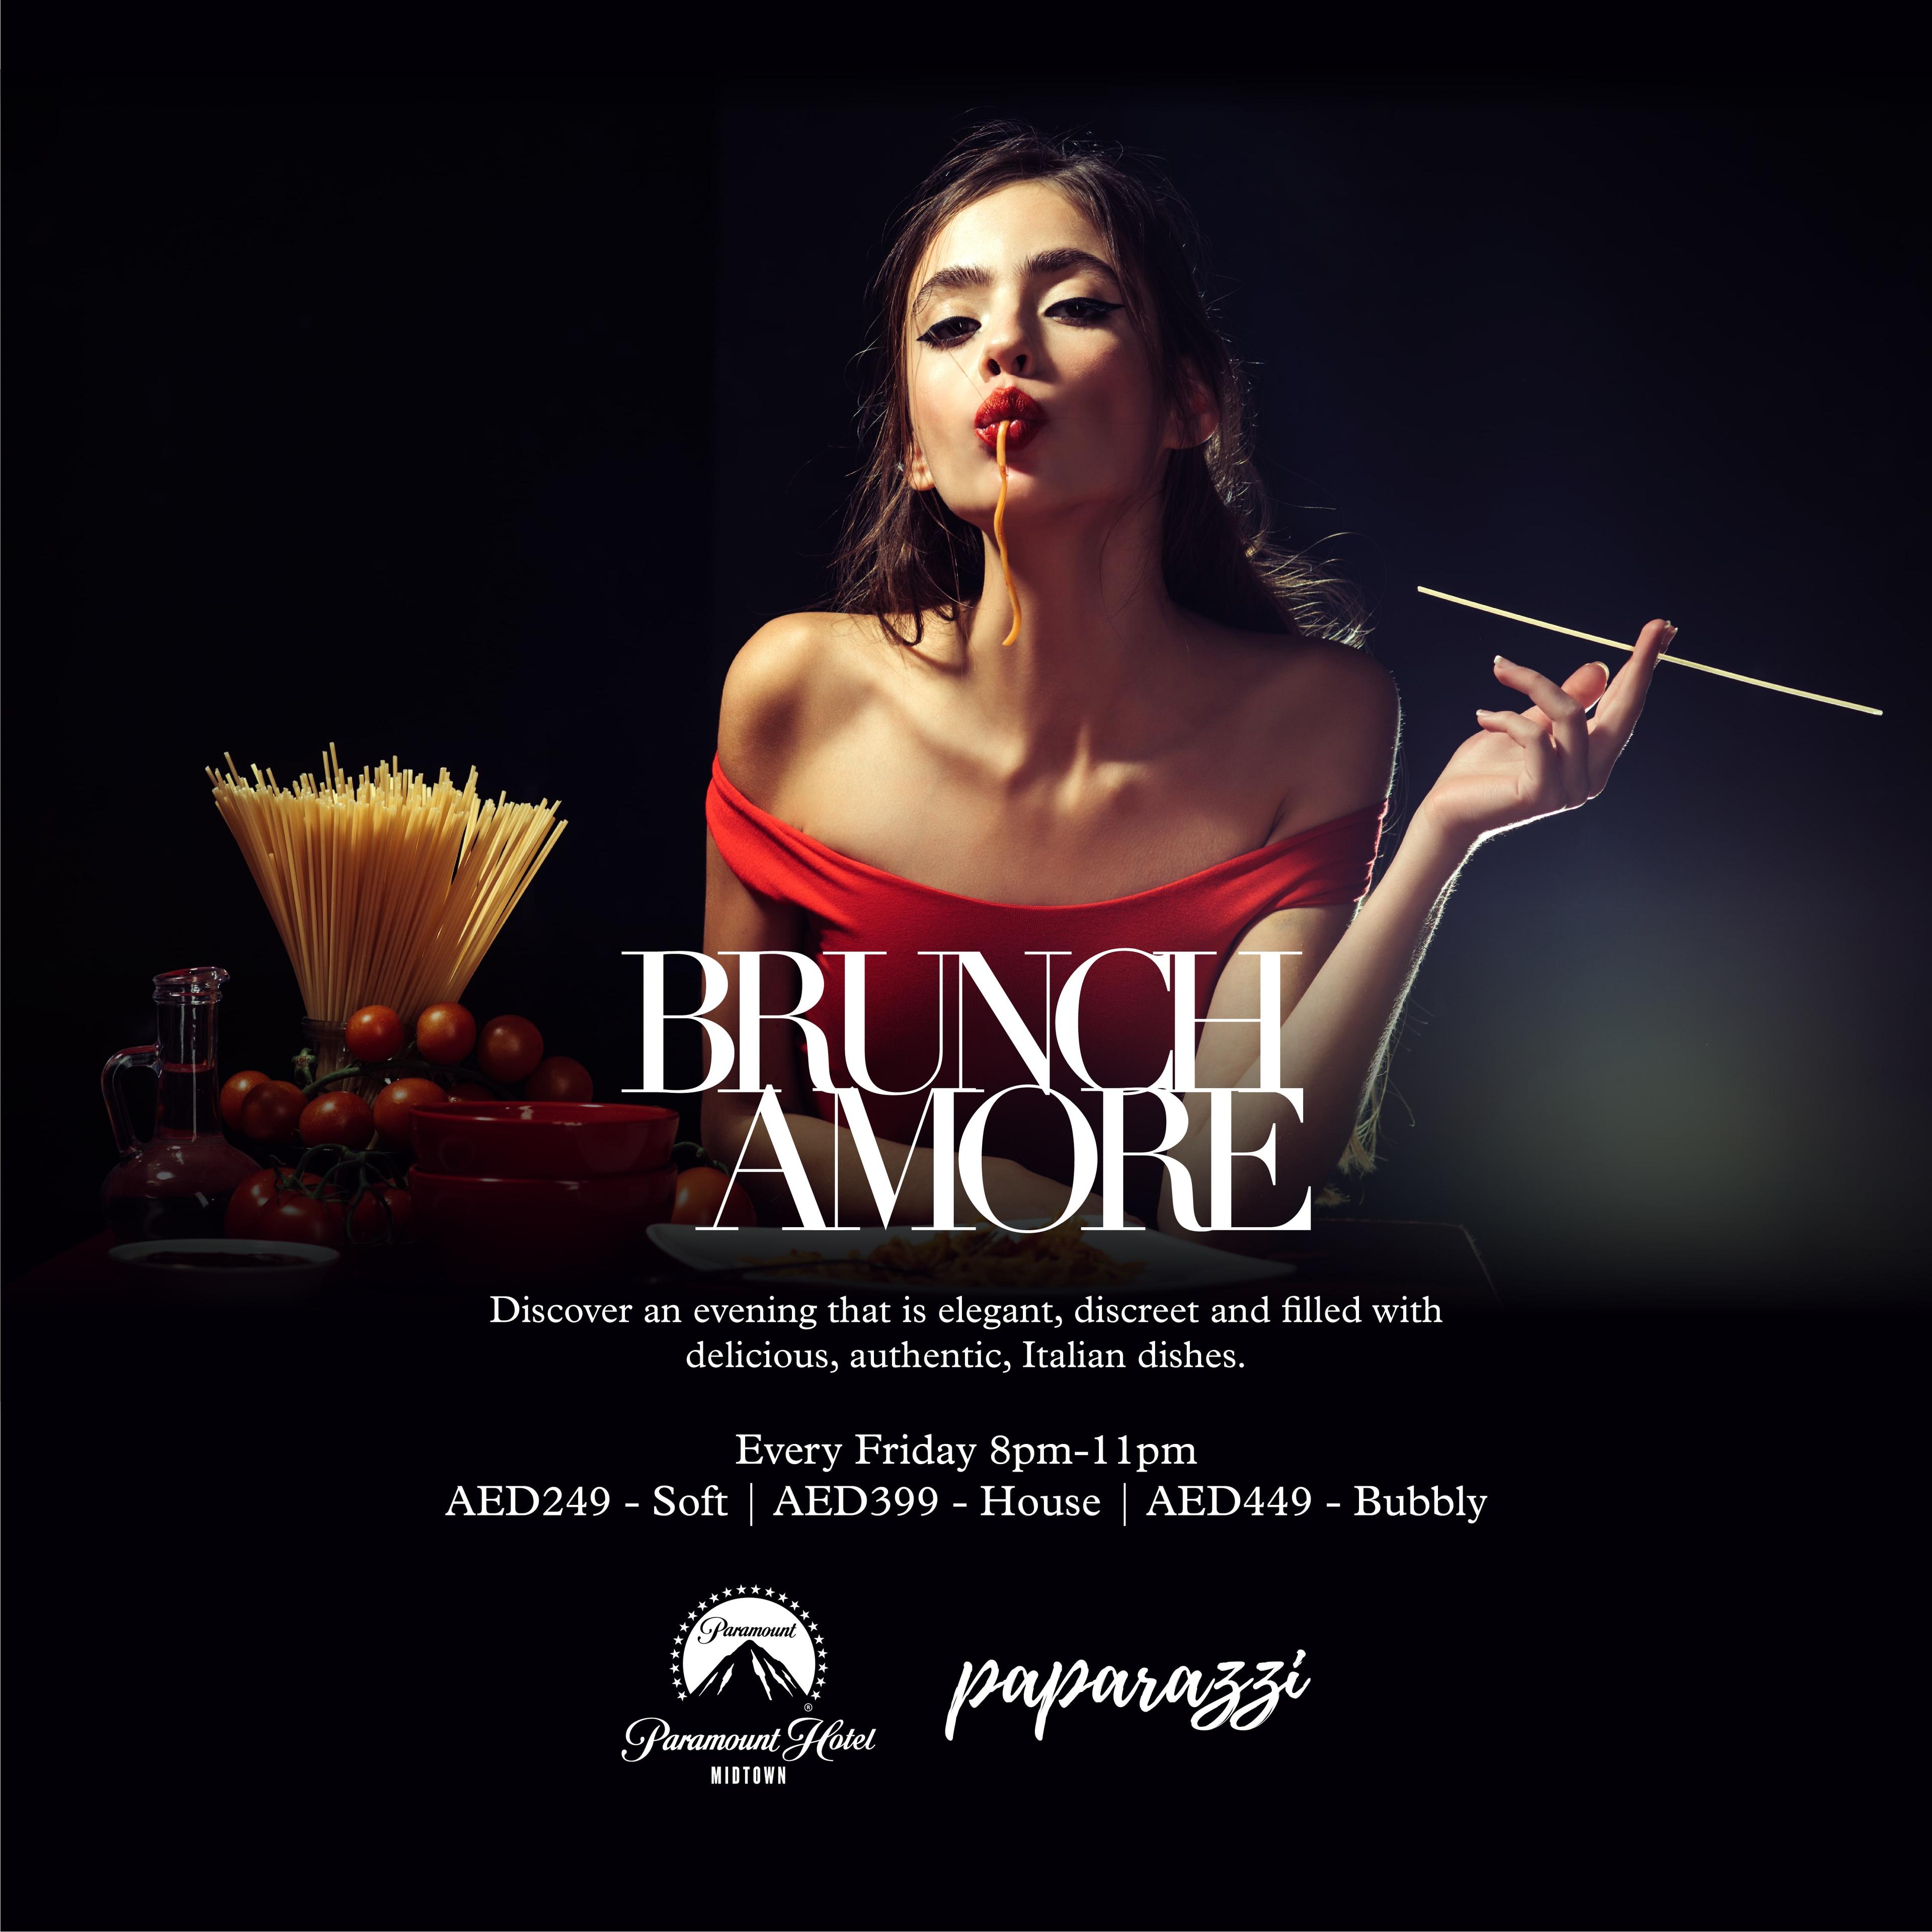 Brunch Amore at Paparazzi